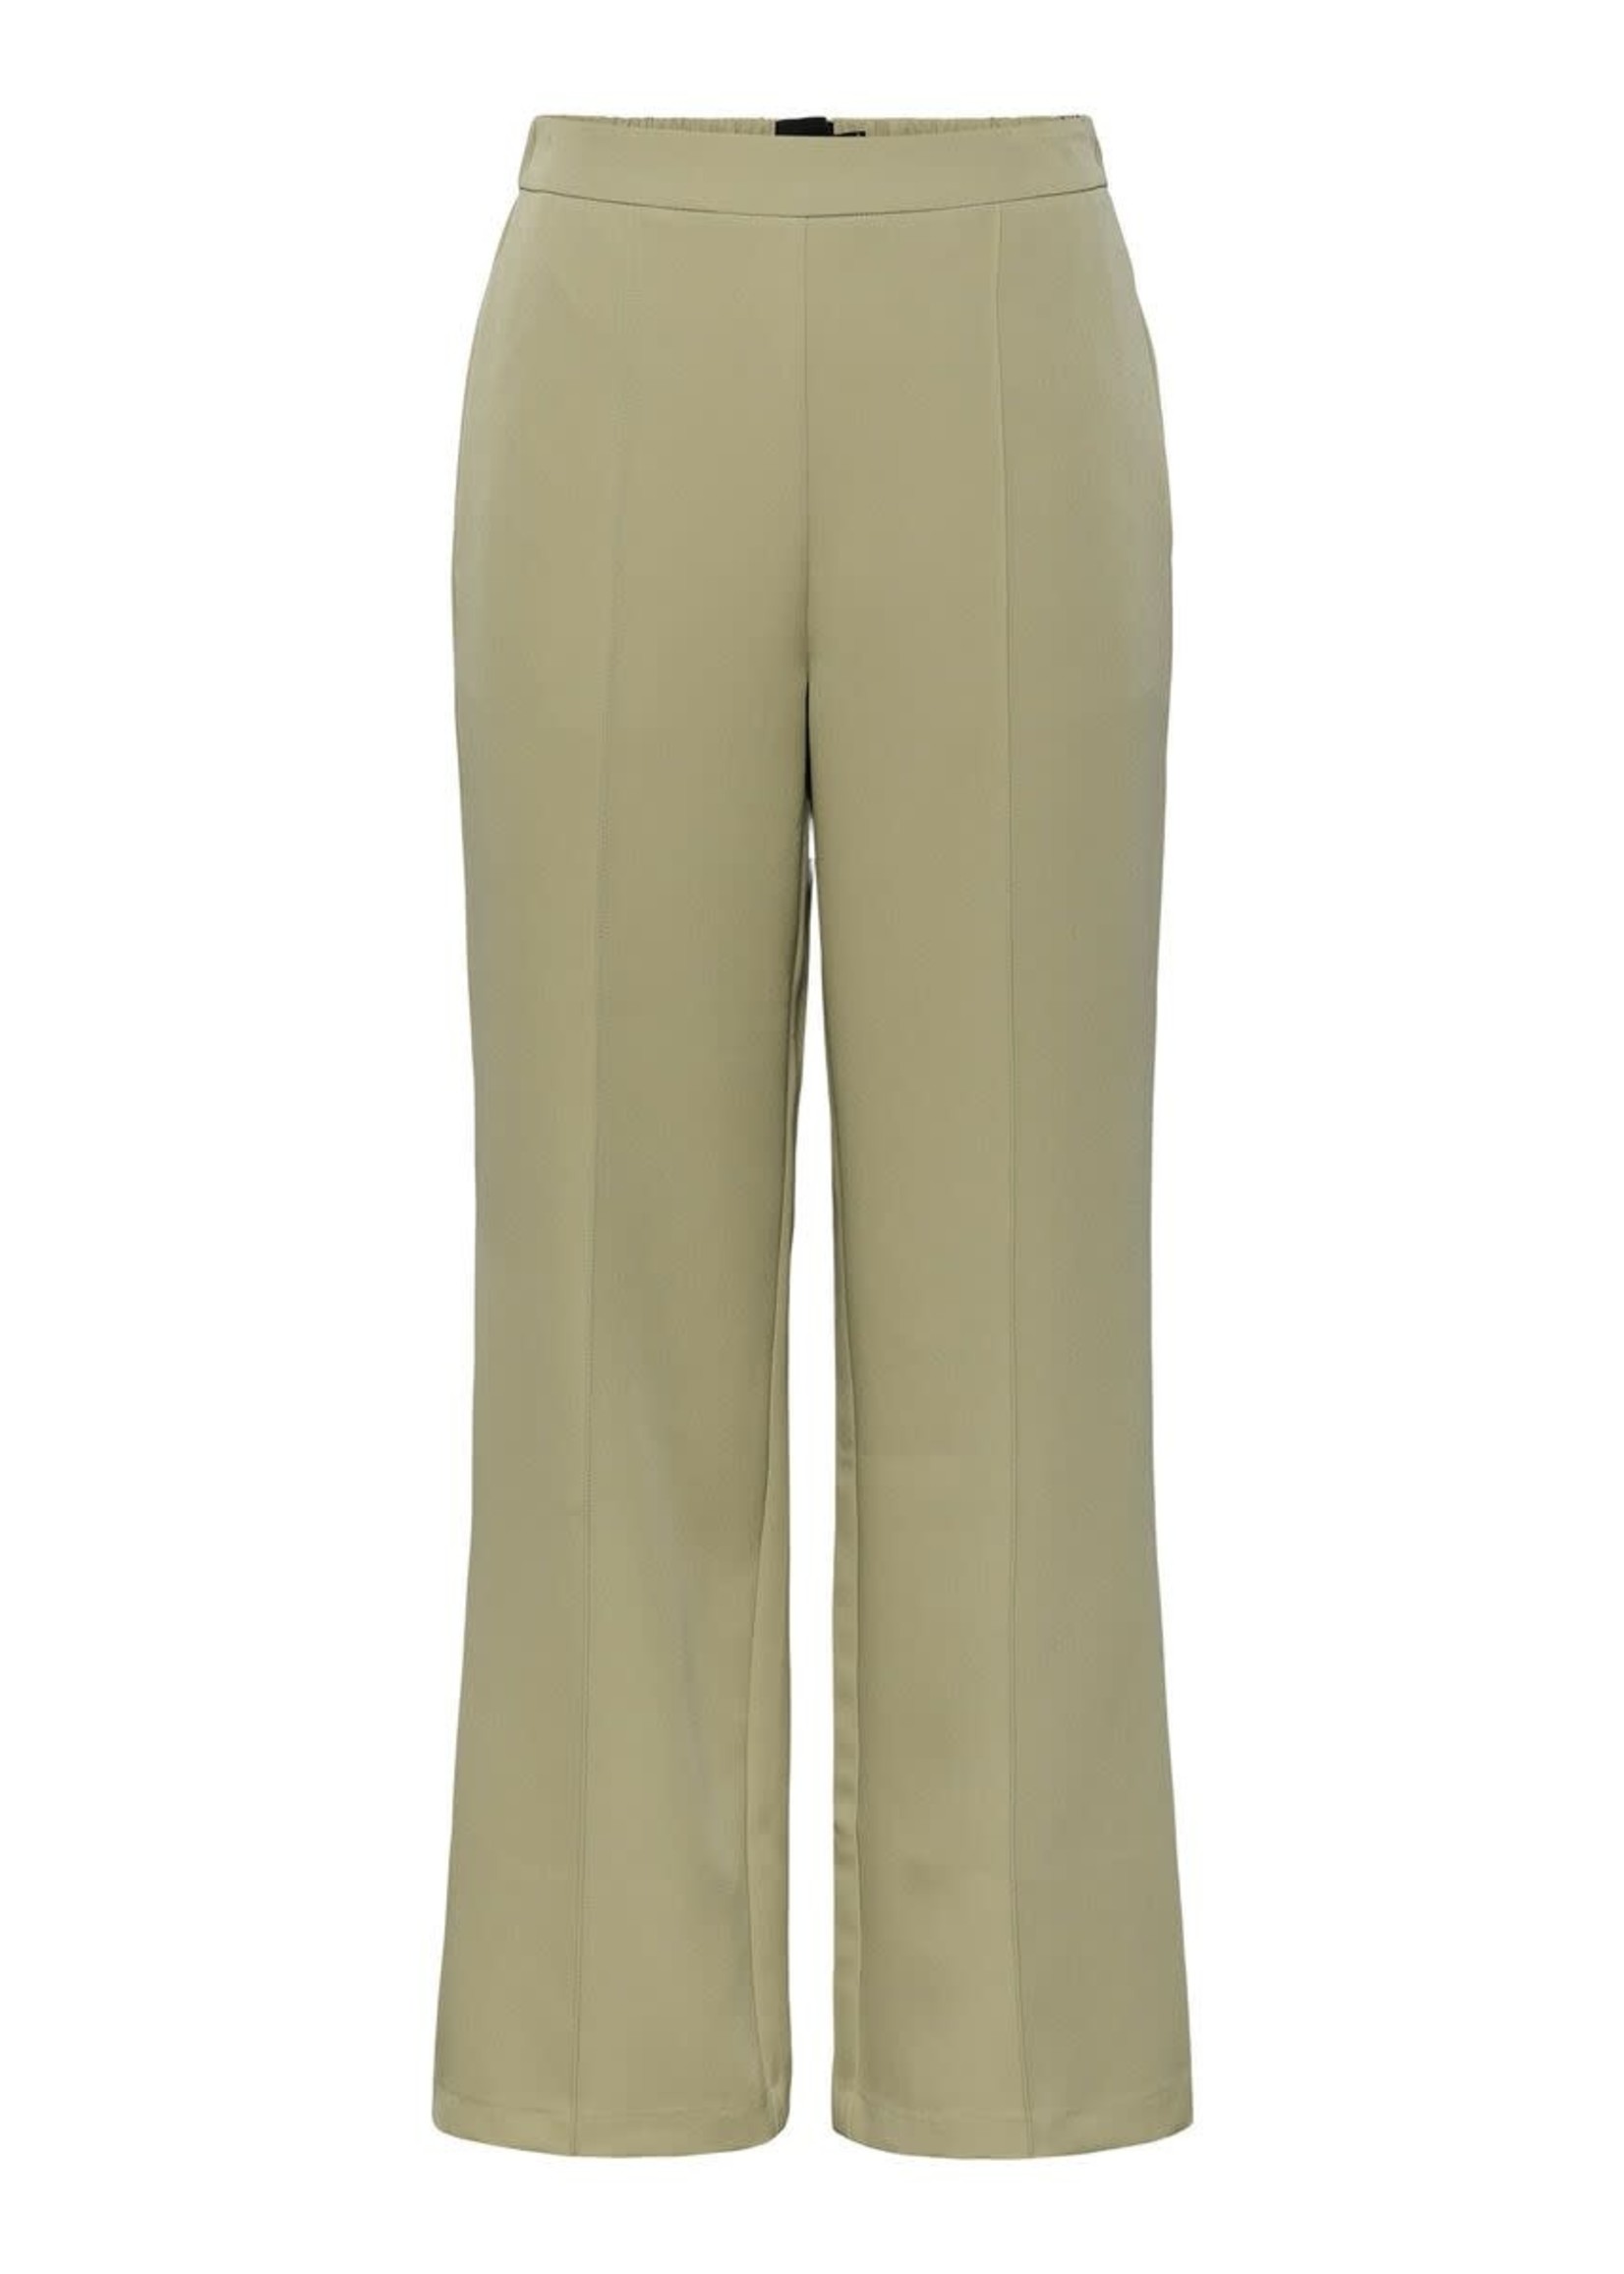 Pieces Pieces Bossy wide pants - Tea Green